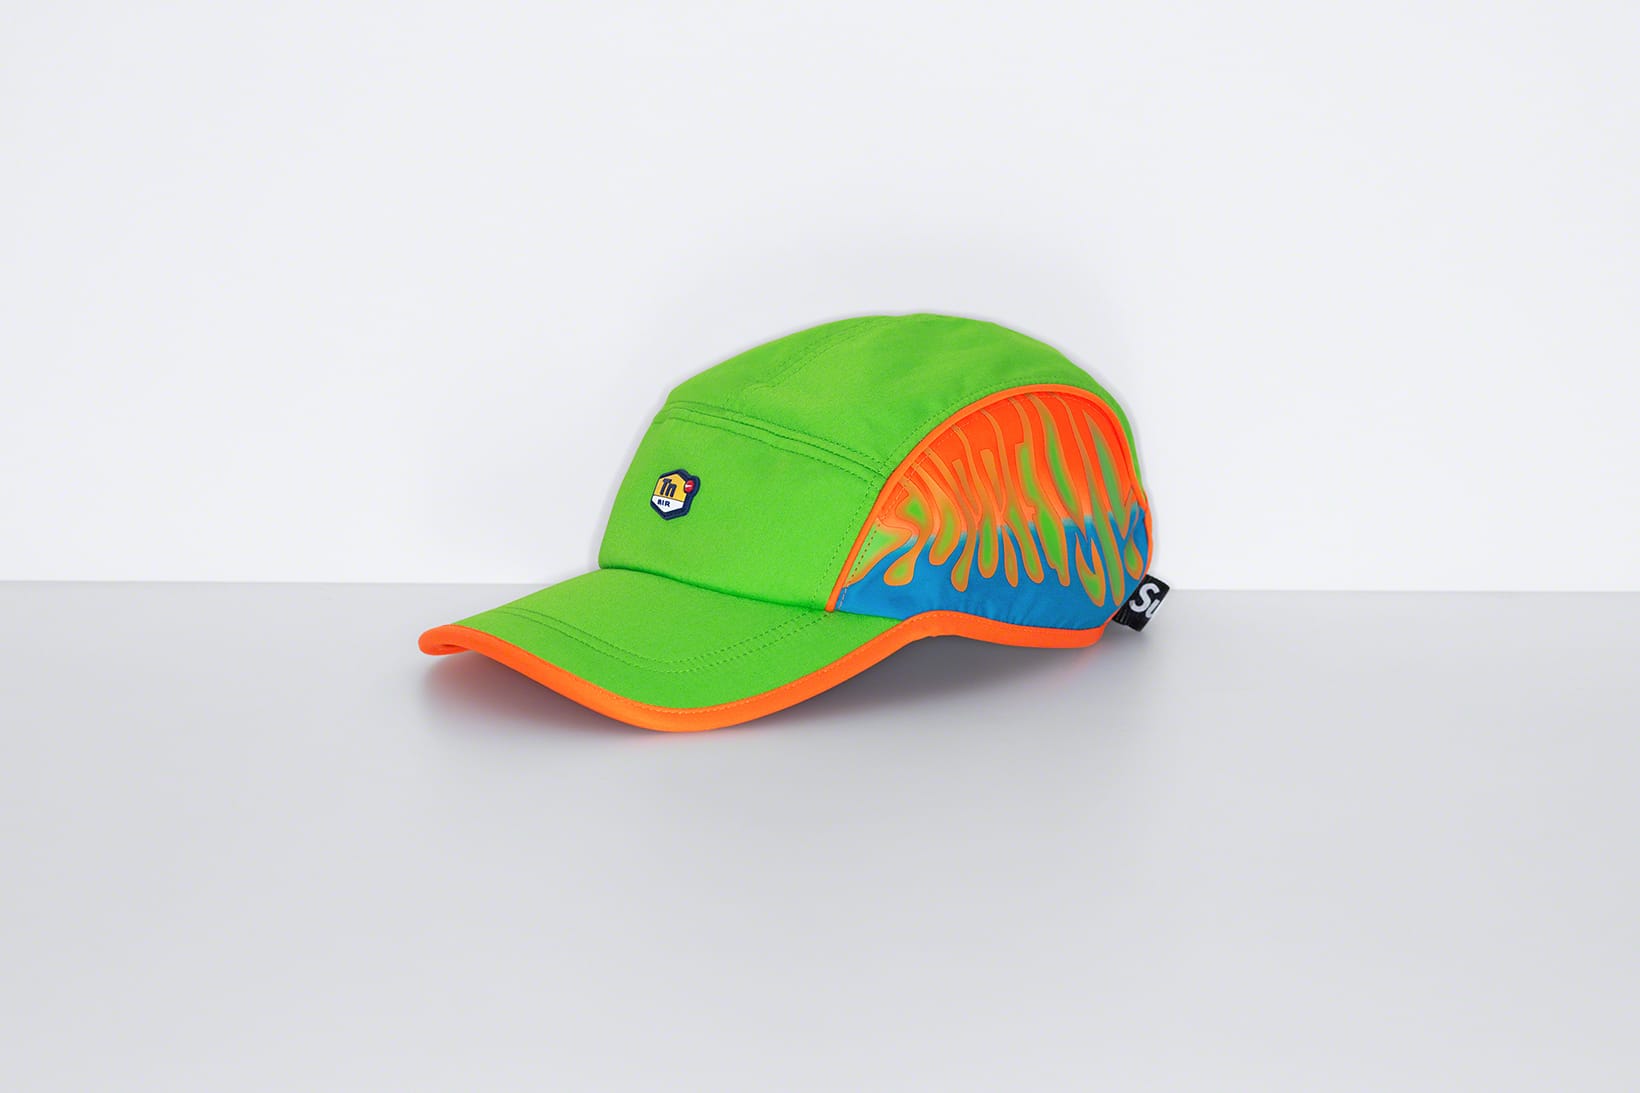 nike tuned air hat